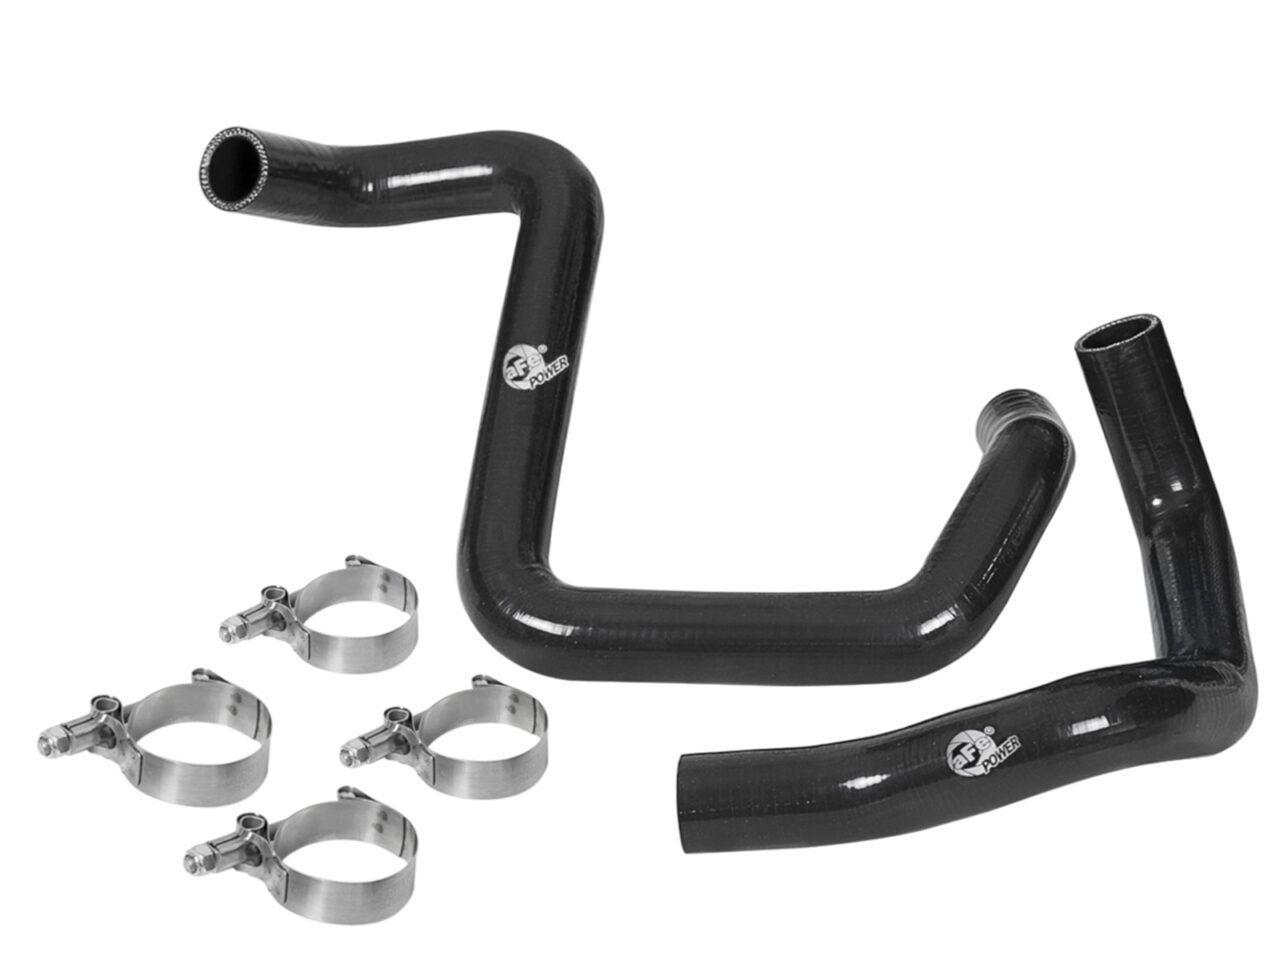 Aftermarket radiator hose set with 2 black silicone radiator hoses and 4 metal clamps on white background